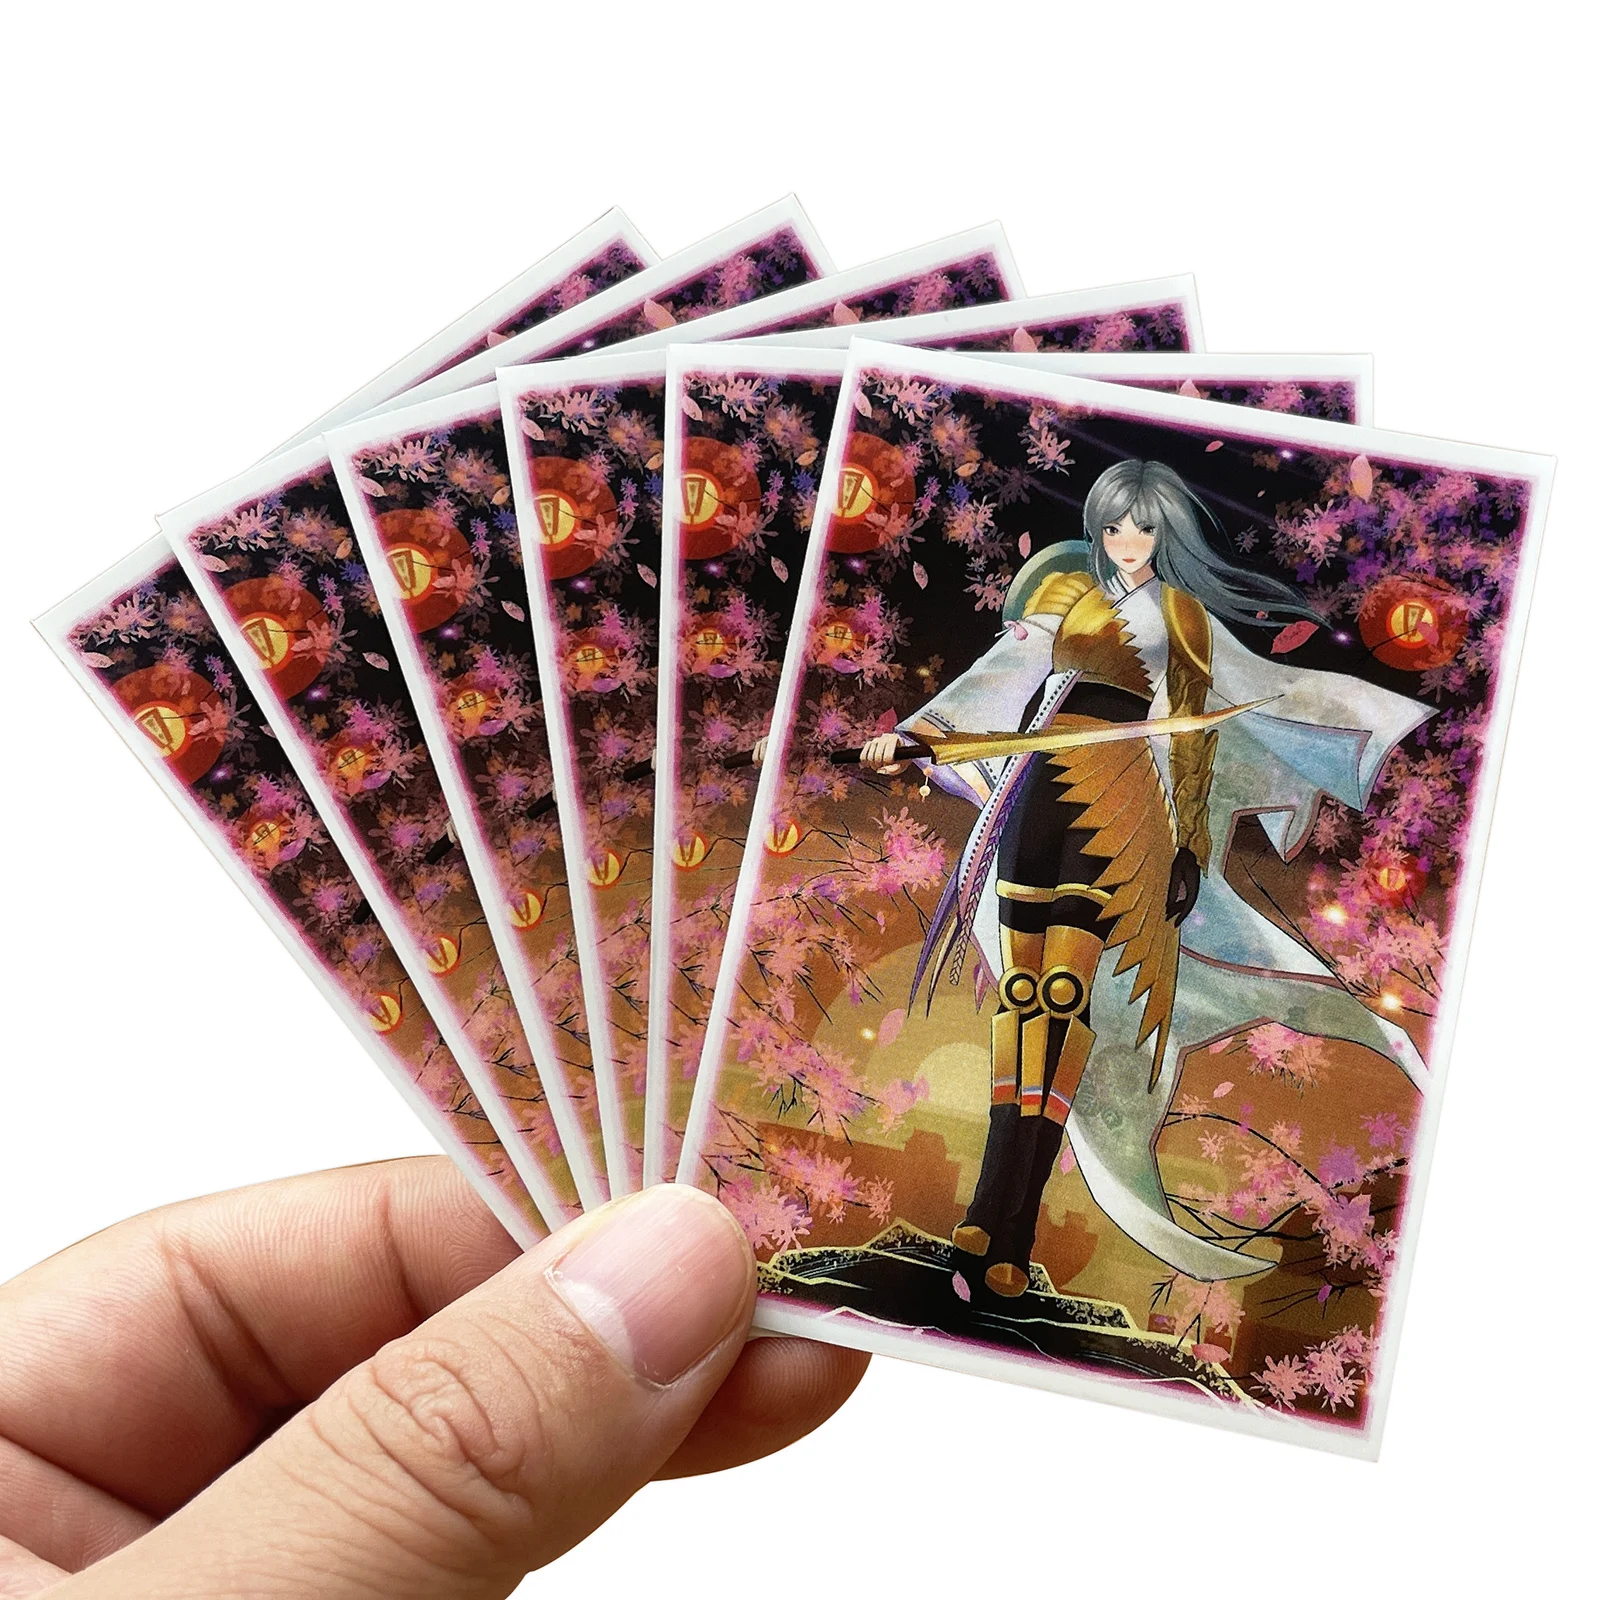 60PCS/BAG TCG Card Sleeves MGT Wandering Emperor Sleeves Game Characters Protector Cards Cover Shield Graphics Color Sleeves PKM 60pcs bag tcg card mgt the wandering emperor sleeves game characters protector cards shield graphics protector color sleeves pkm